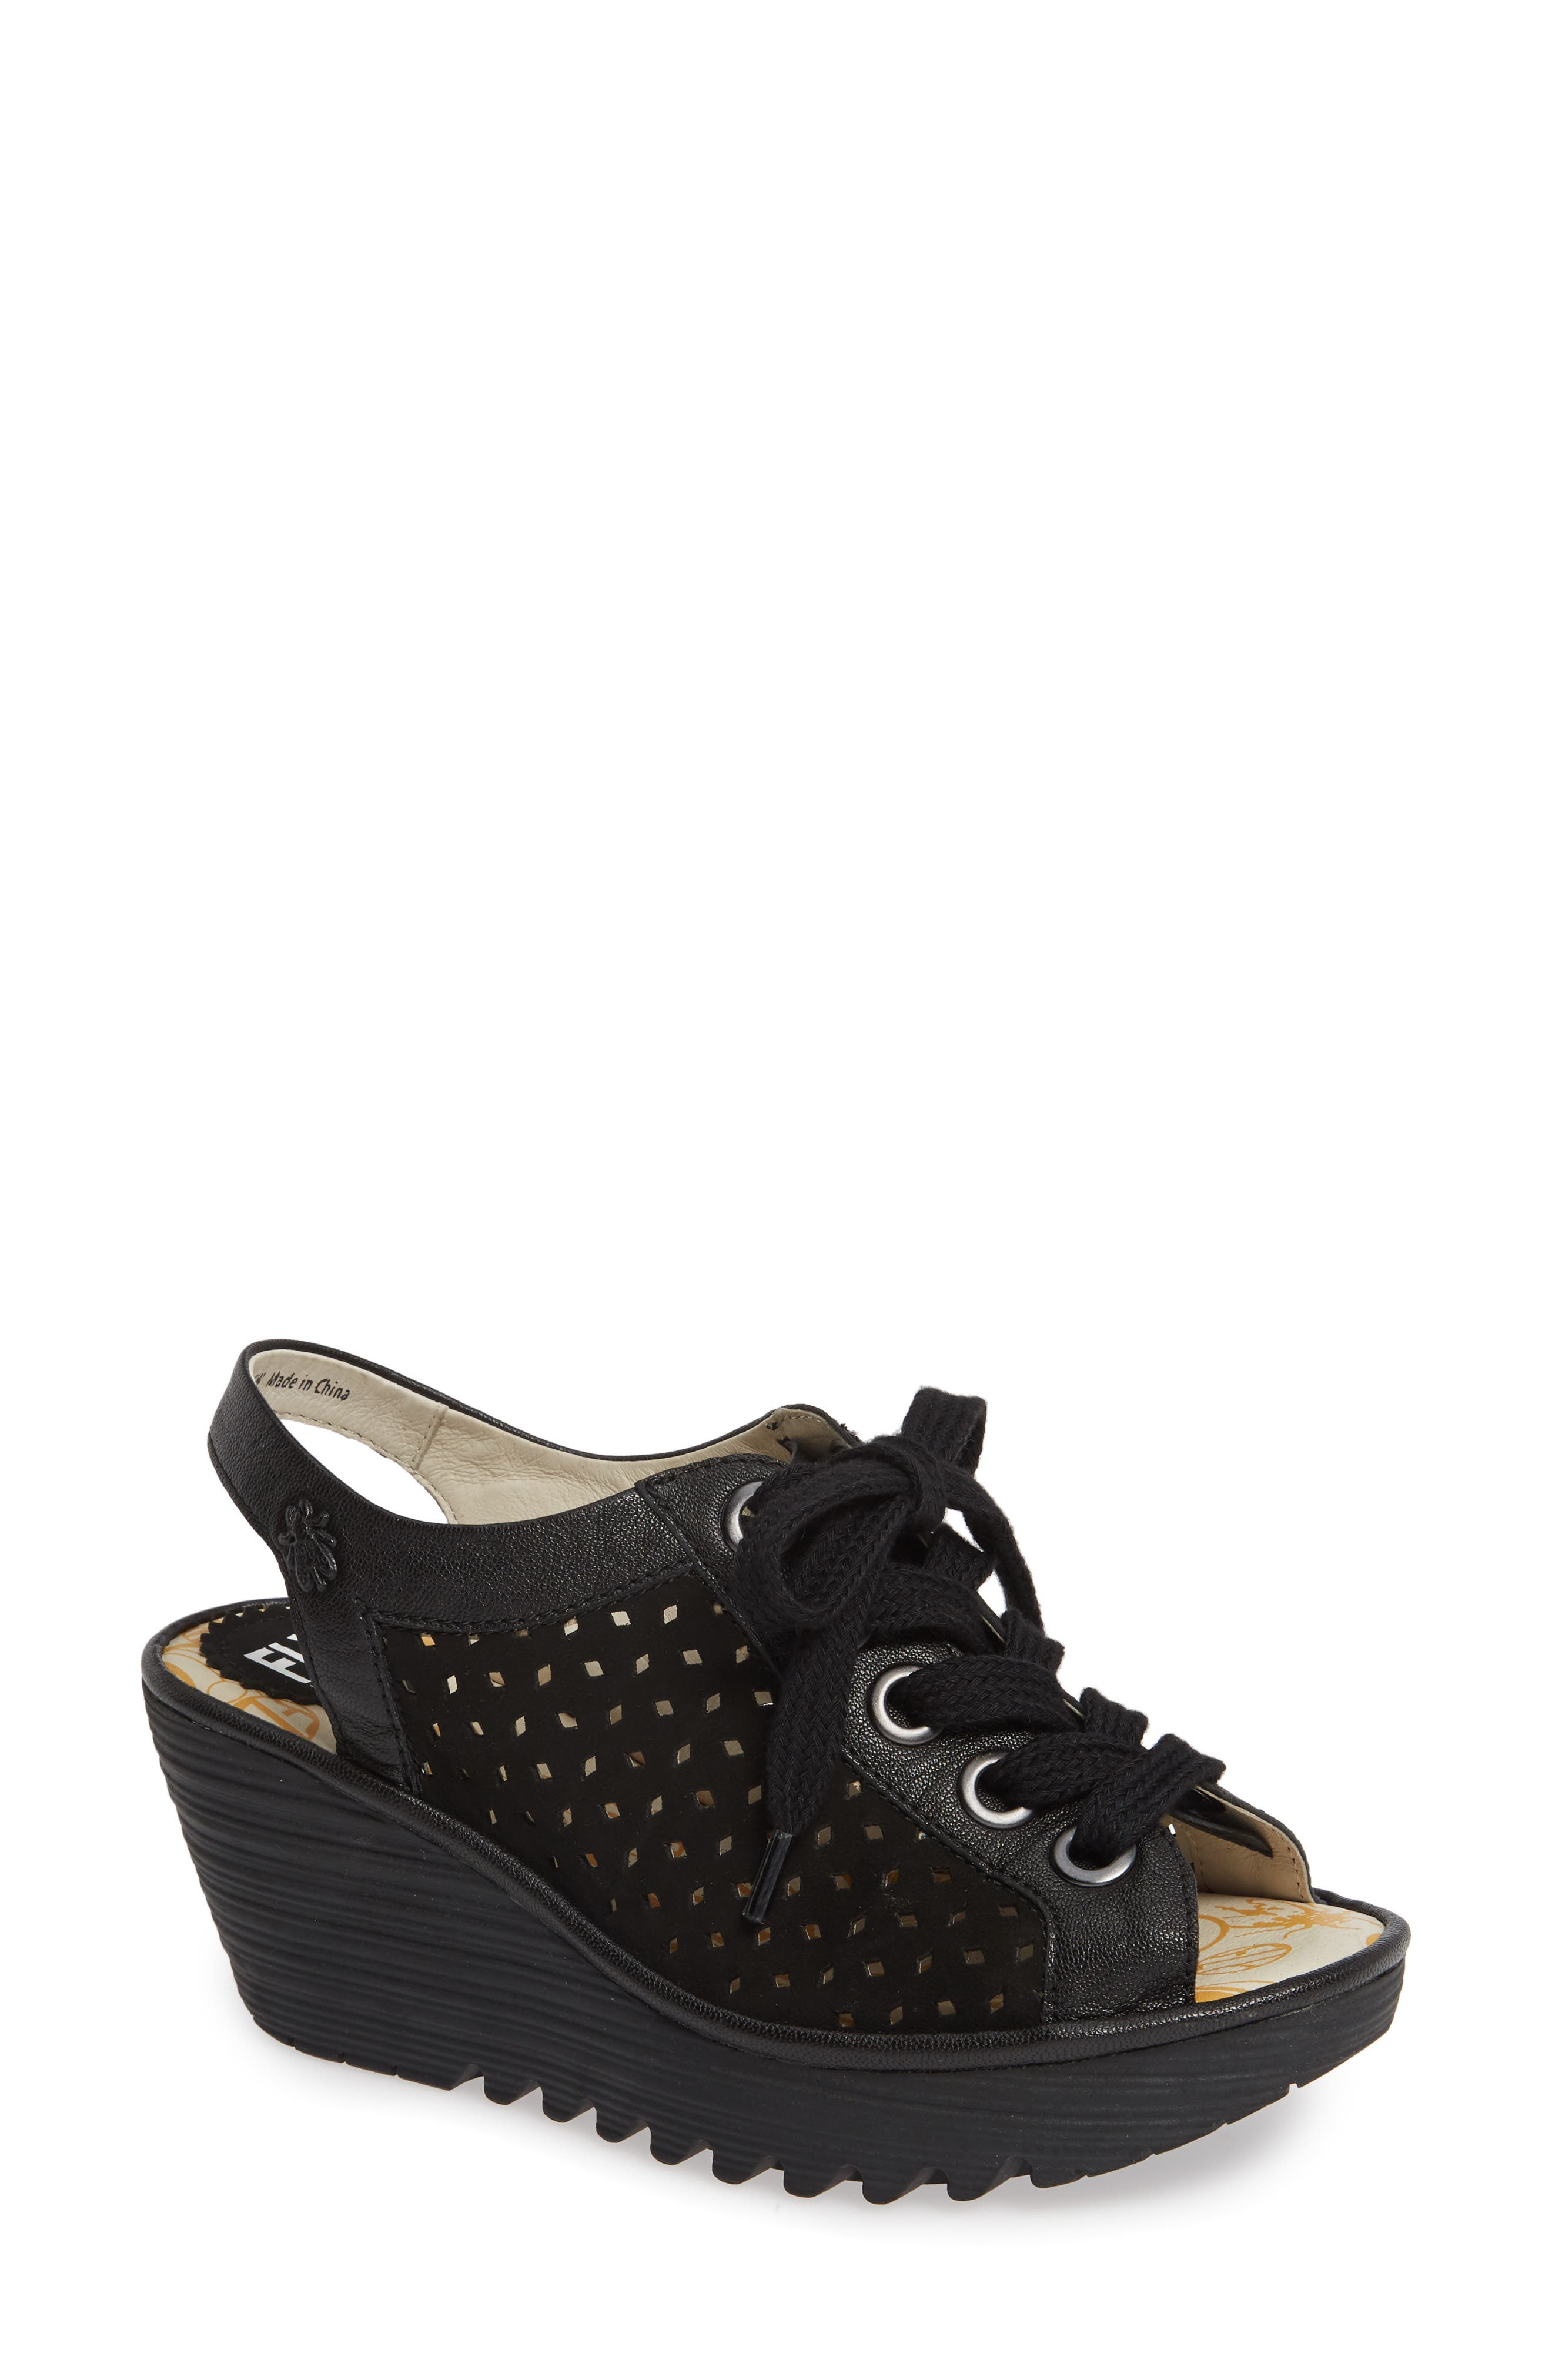 fly london wedge shoes